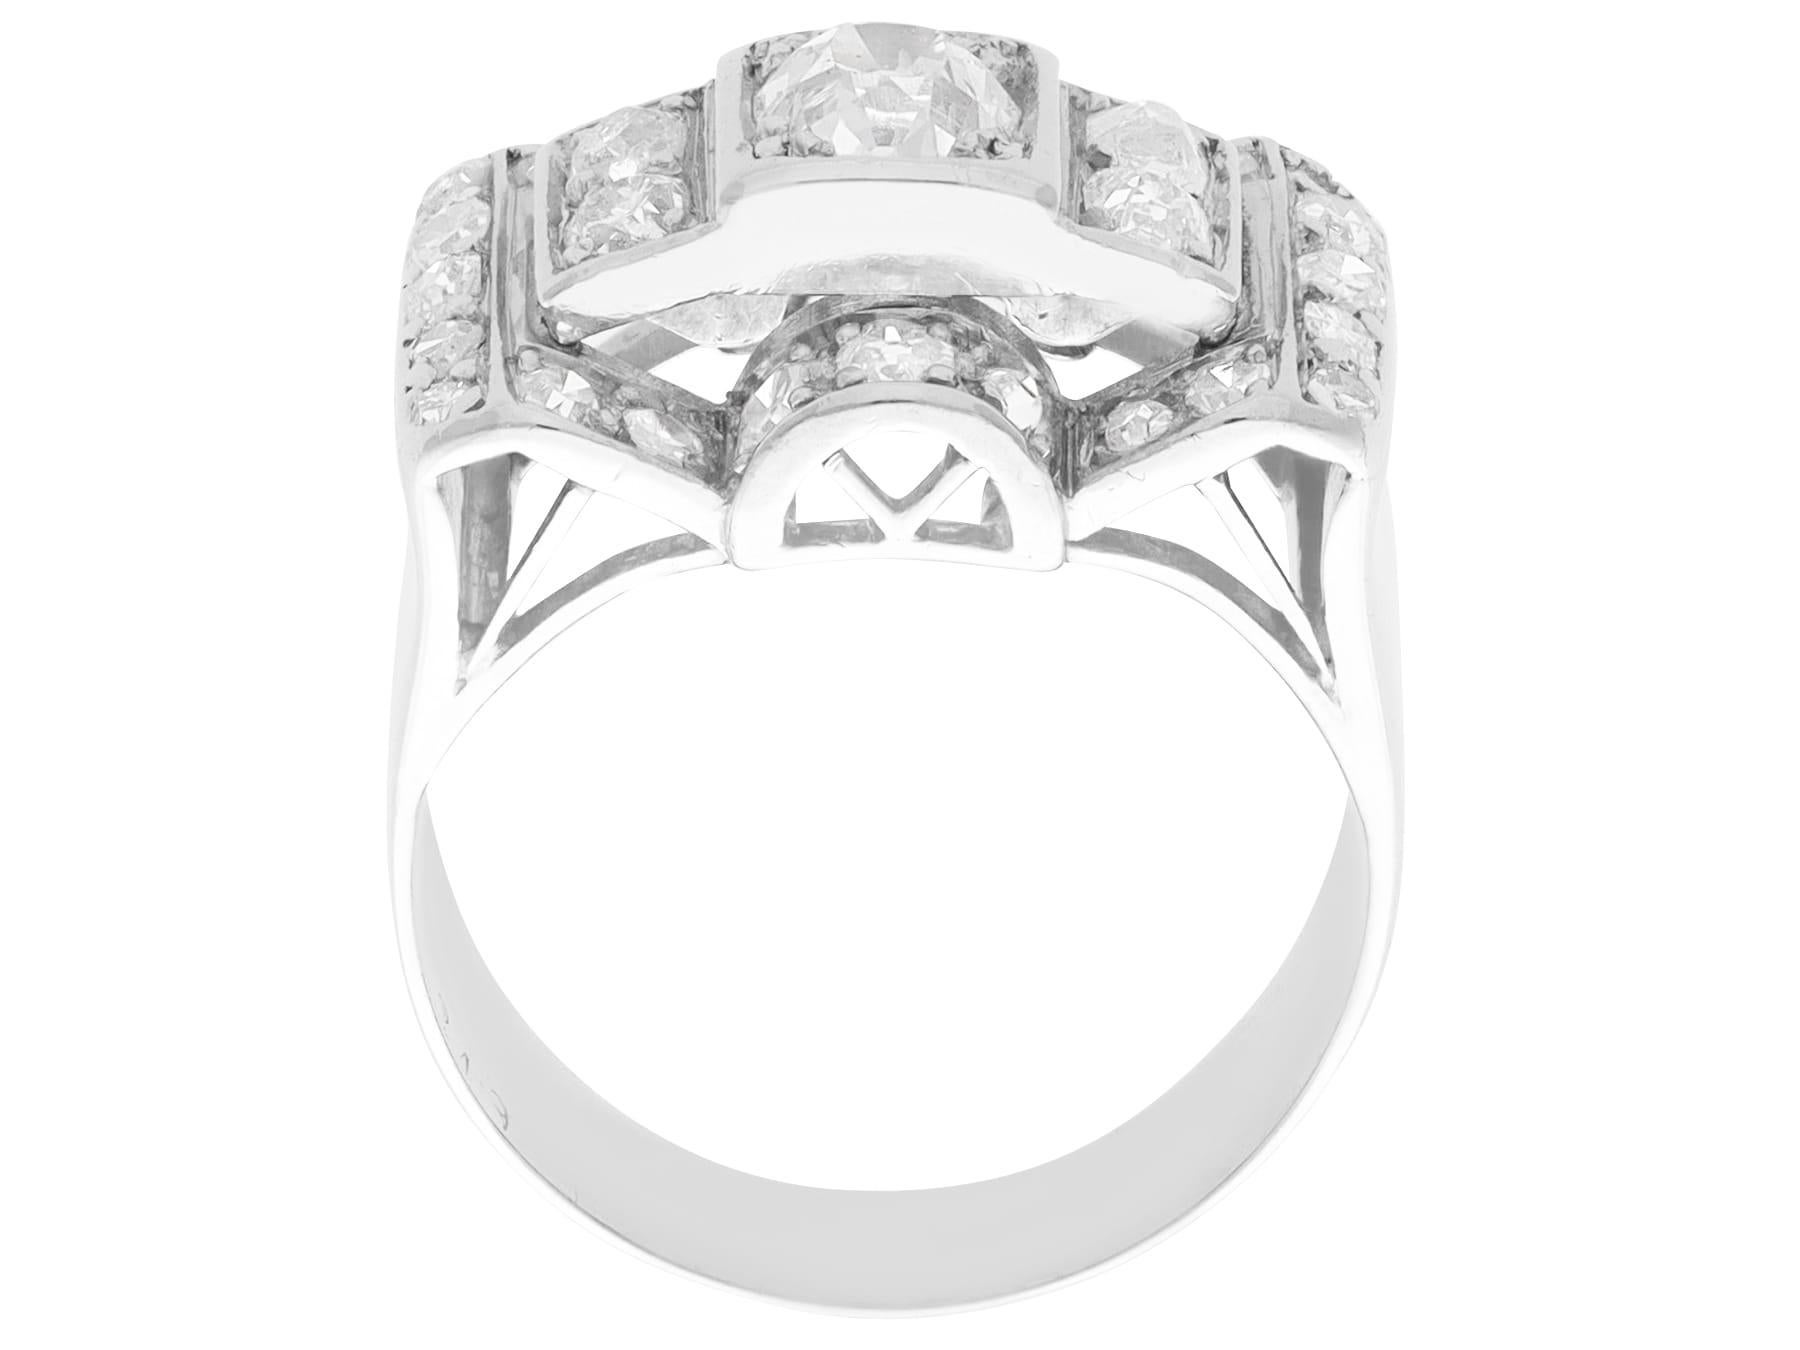 Women's or Men's Antique Art Deco 1.45 Carat Diamond and White Gold Cocktail Ring For Sale